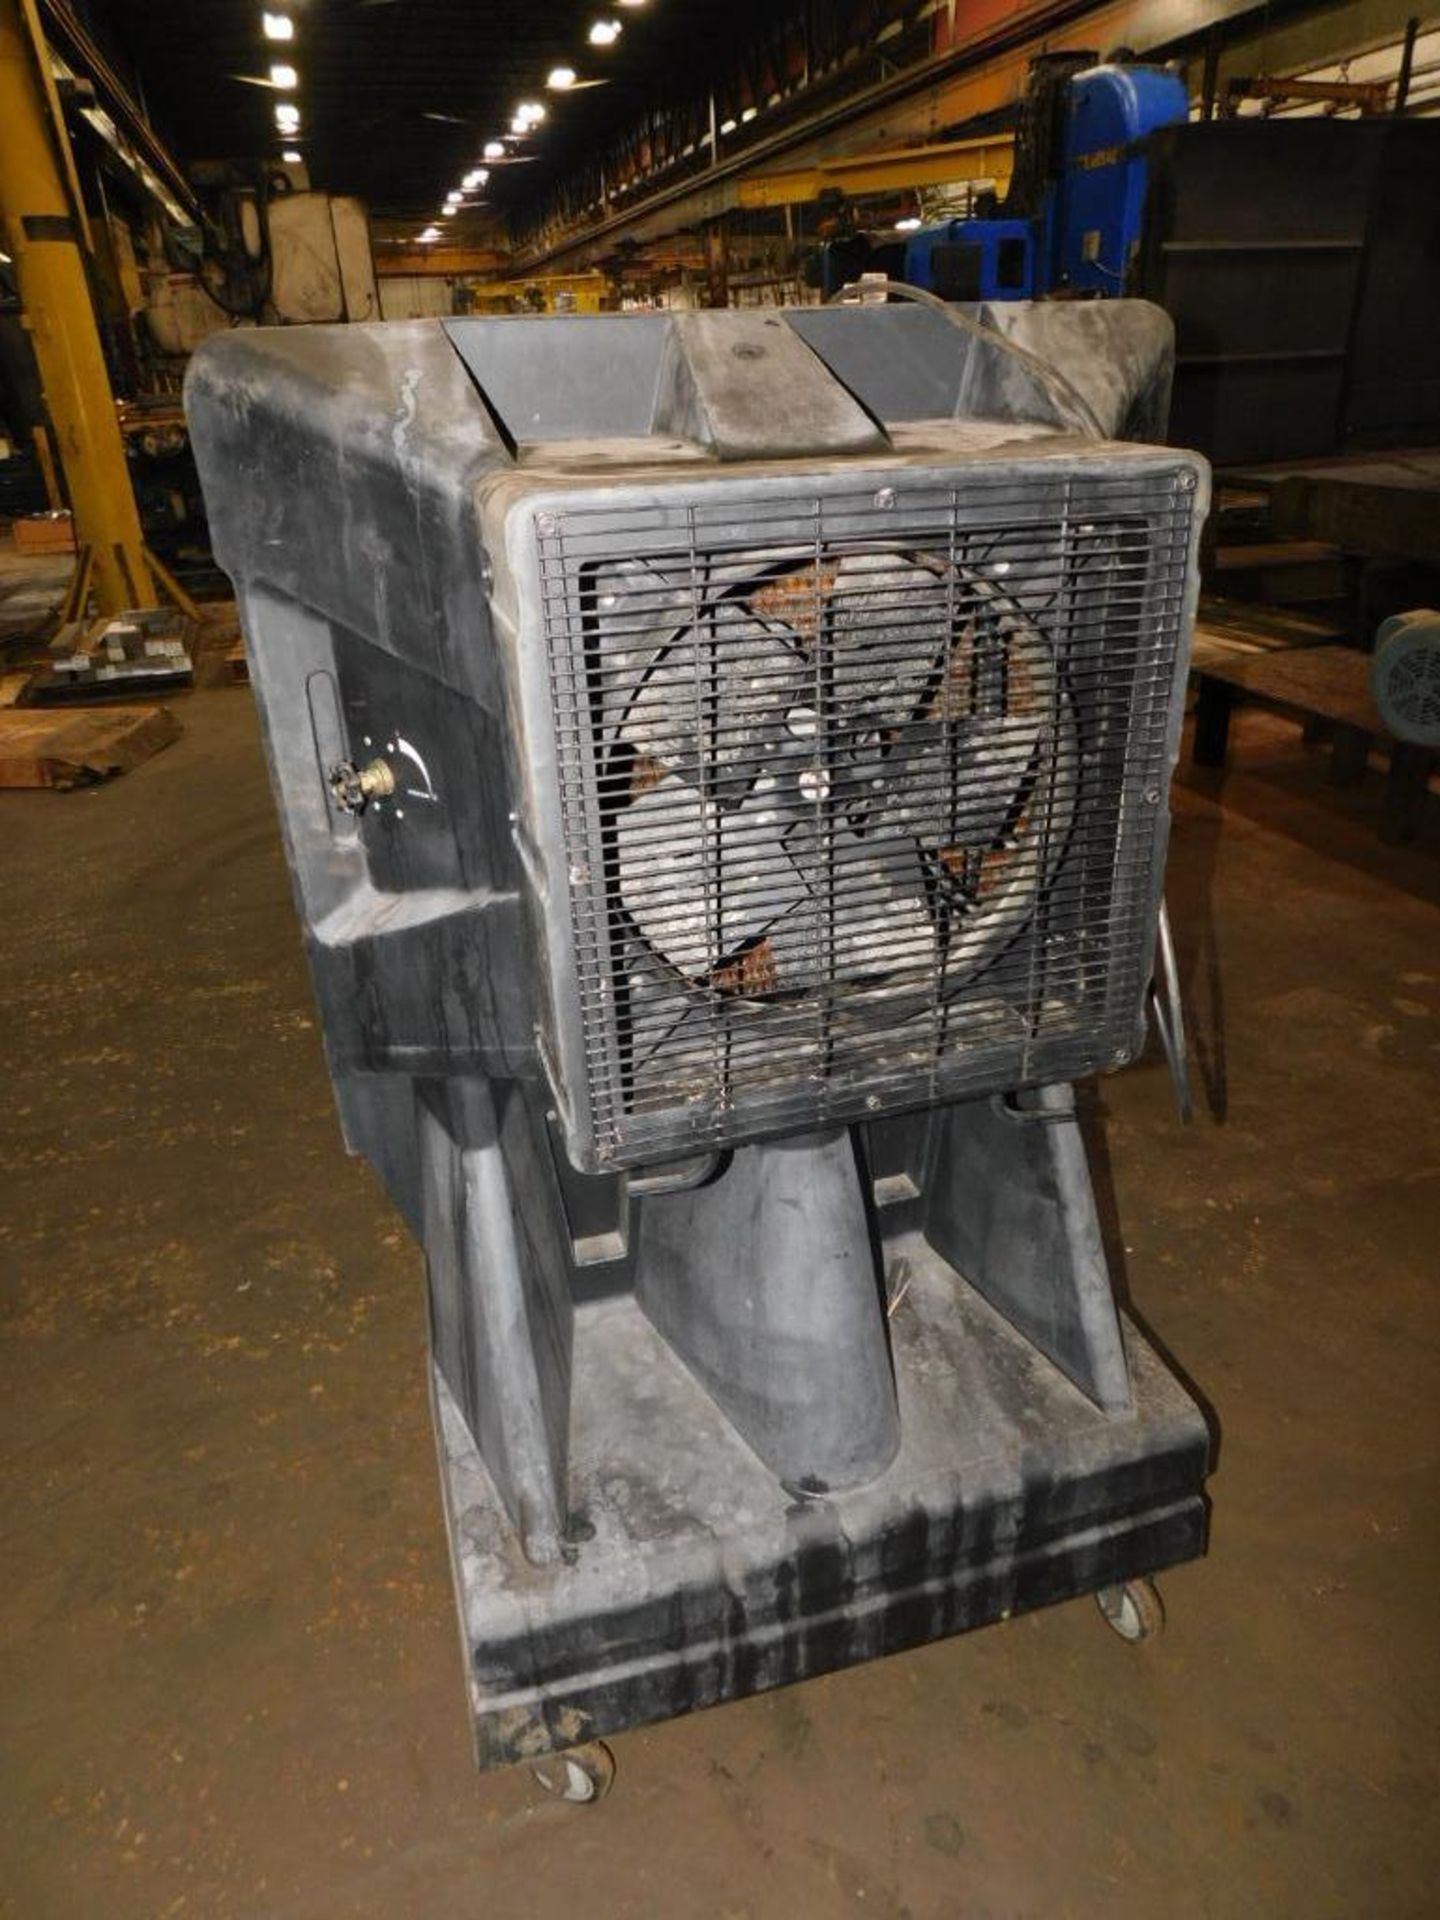 Port-A-Cool 16" Portable Evaporative Cooler - Image 3 of 3